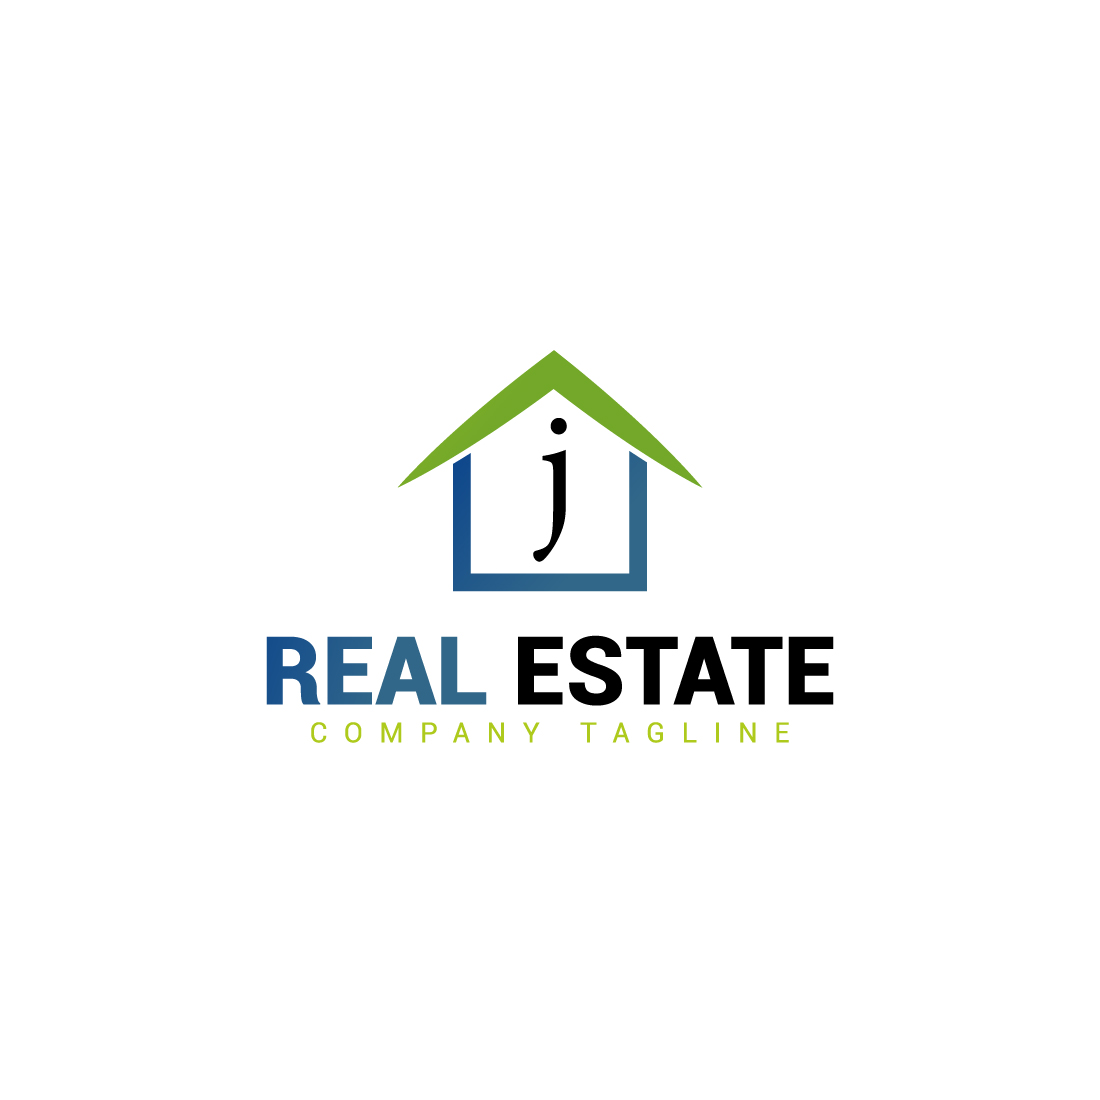 Real estate logo with green, dark blue color and J letter cover image.